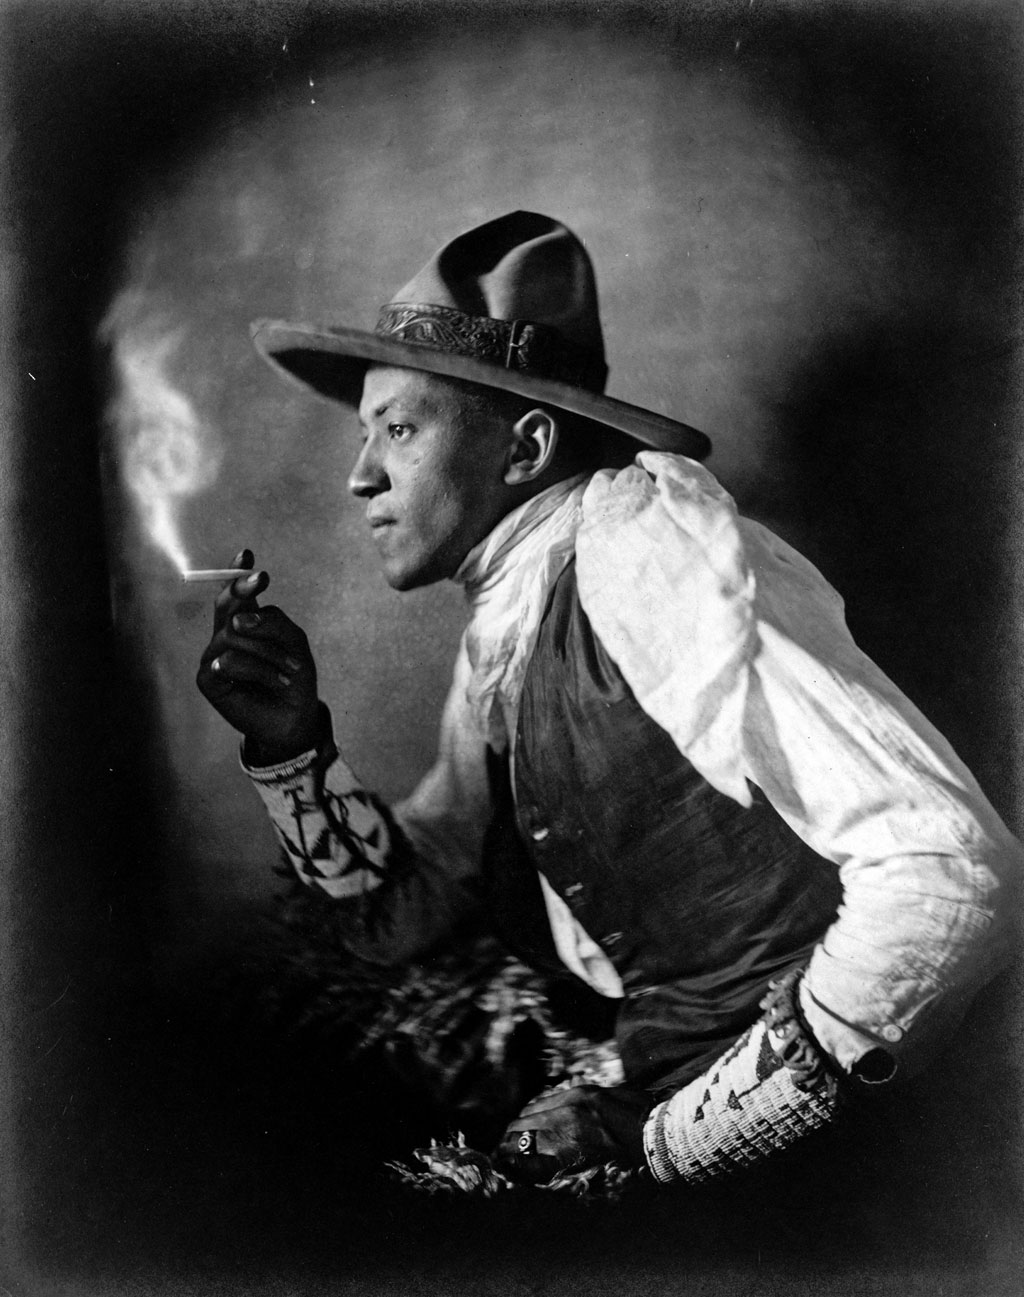 A portrait of a Sioux Indian smoking a cigarette. Photograph by John A. Johnson, c. 1908. View full size.